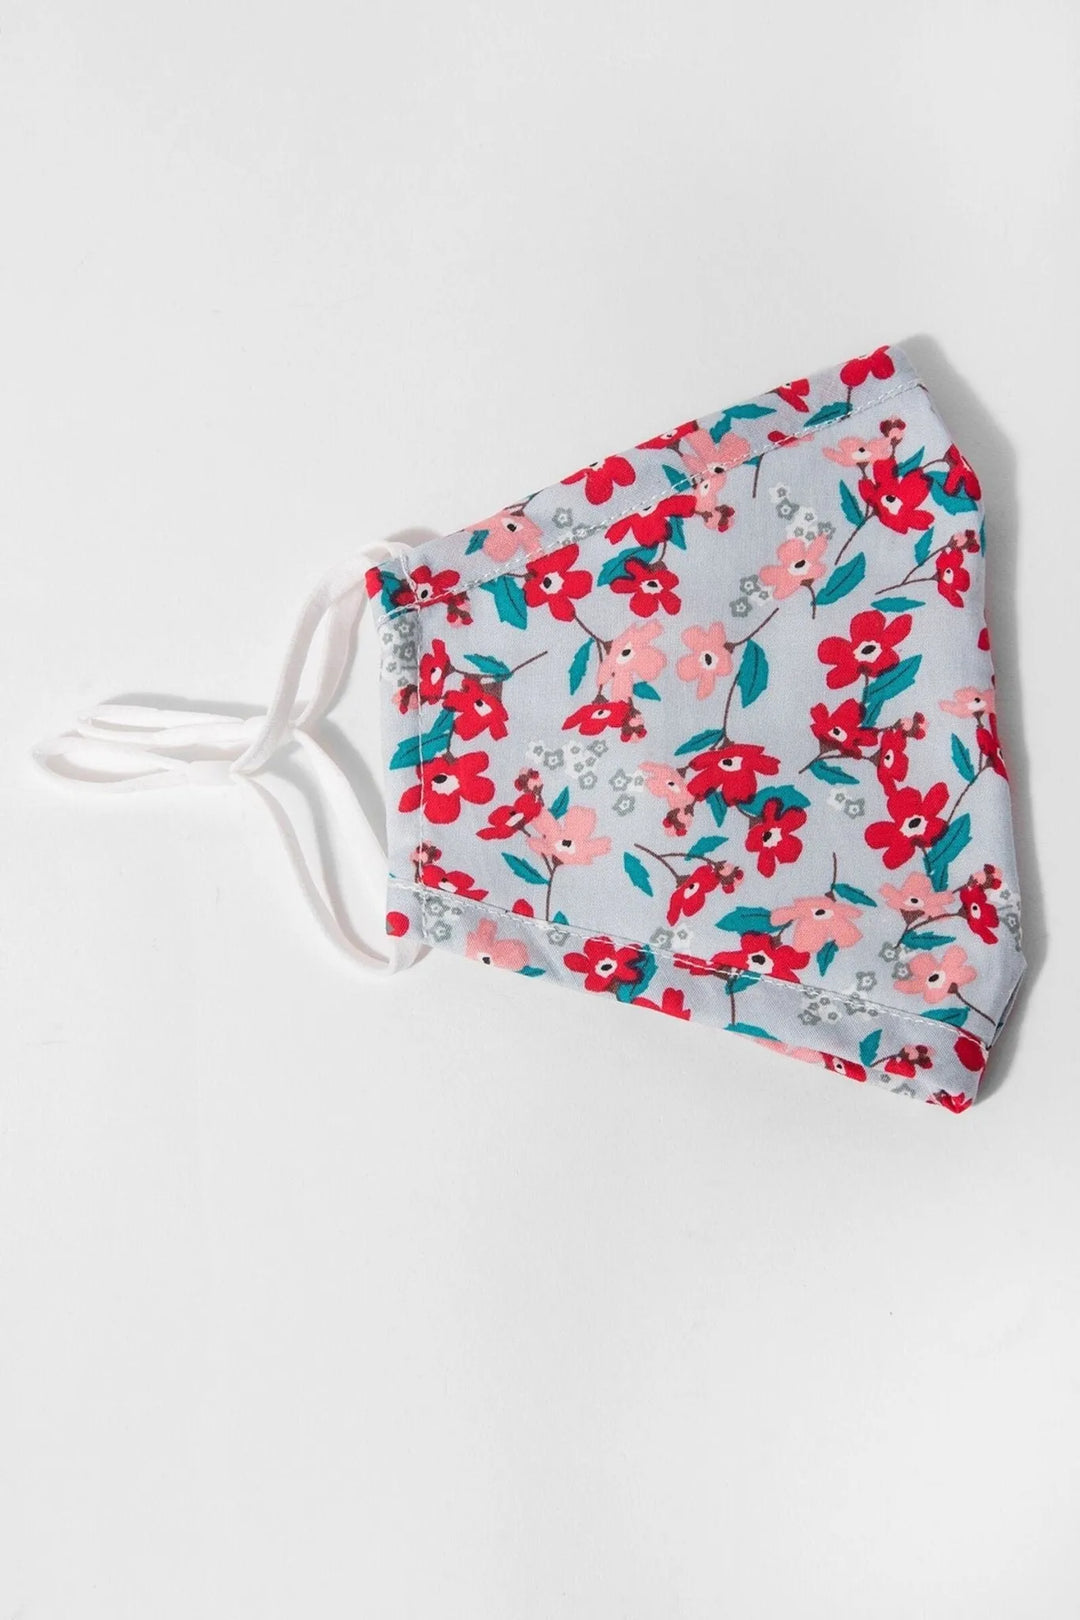 Adjustable Floral Face Mask with Two PM2.5 Filters Crimson